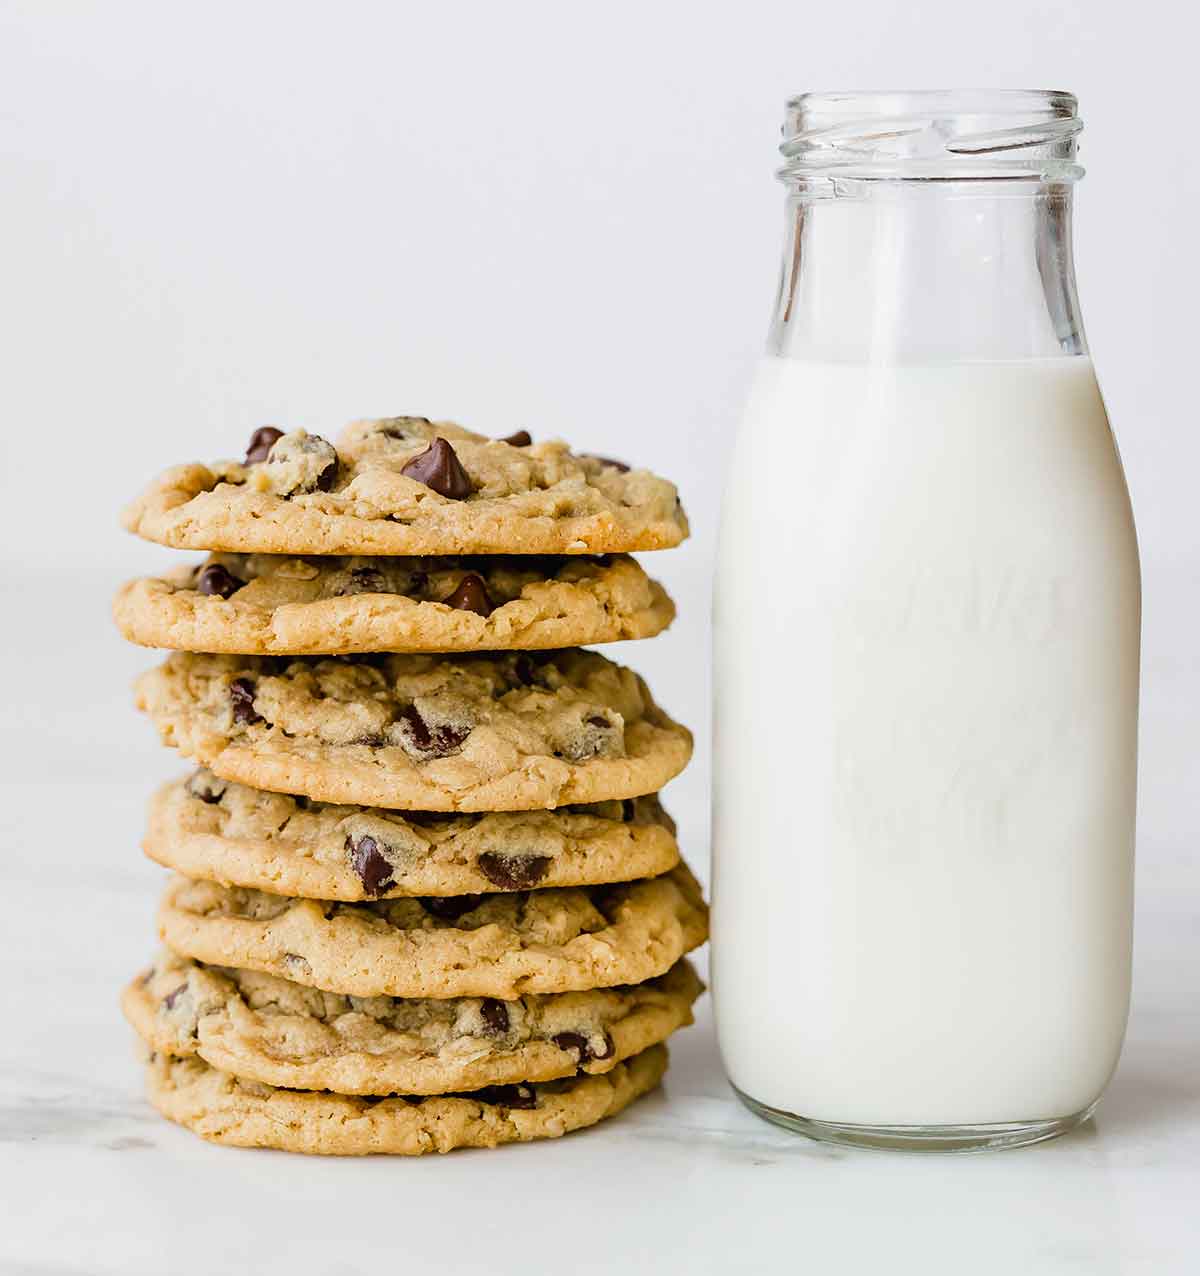 A stack of peanut butter oatmeal chocolate chip cookies next to a glass jar of milk.